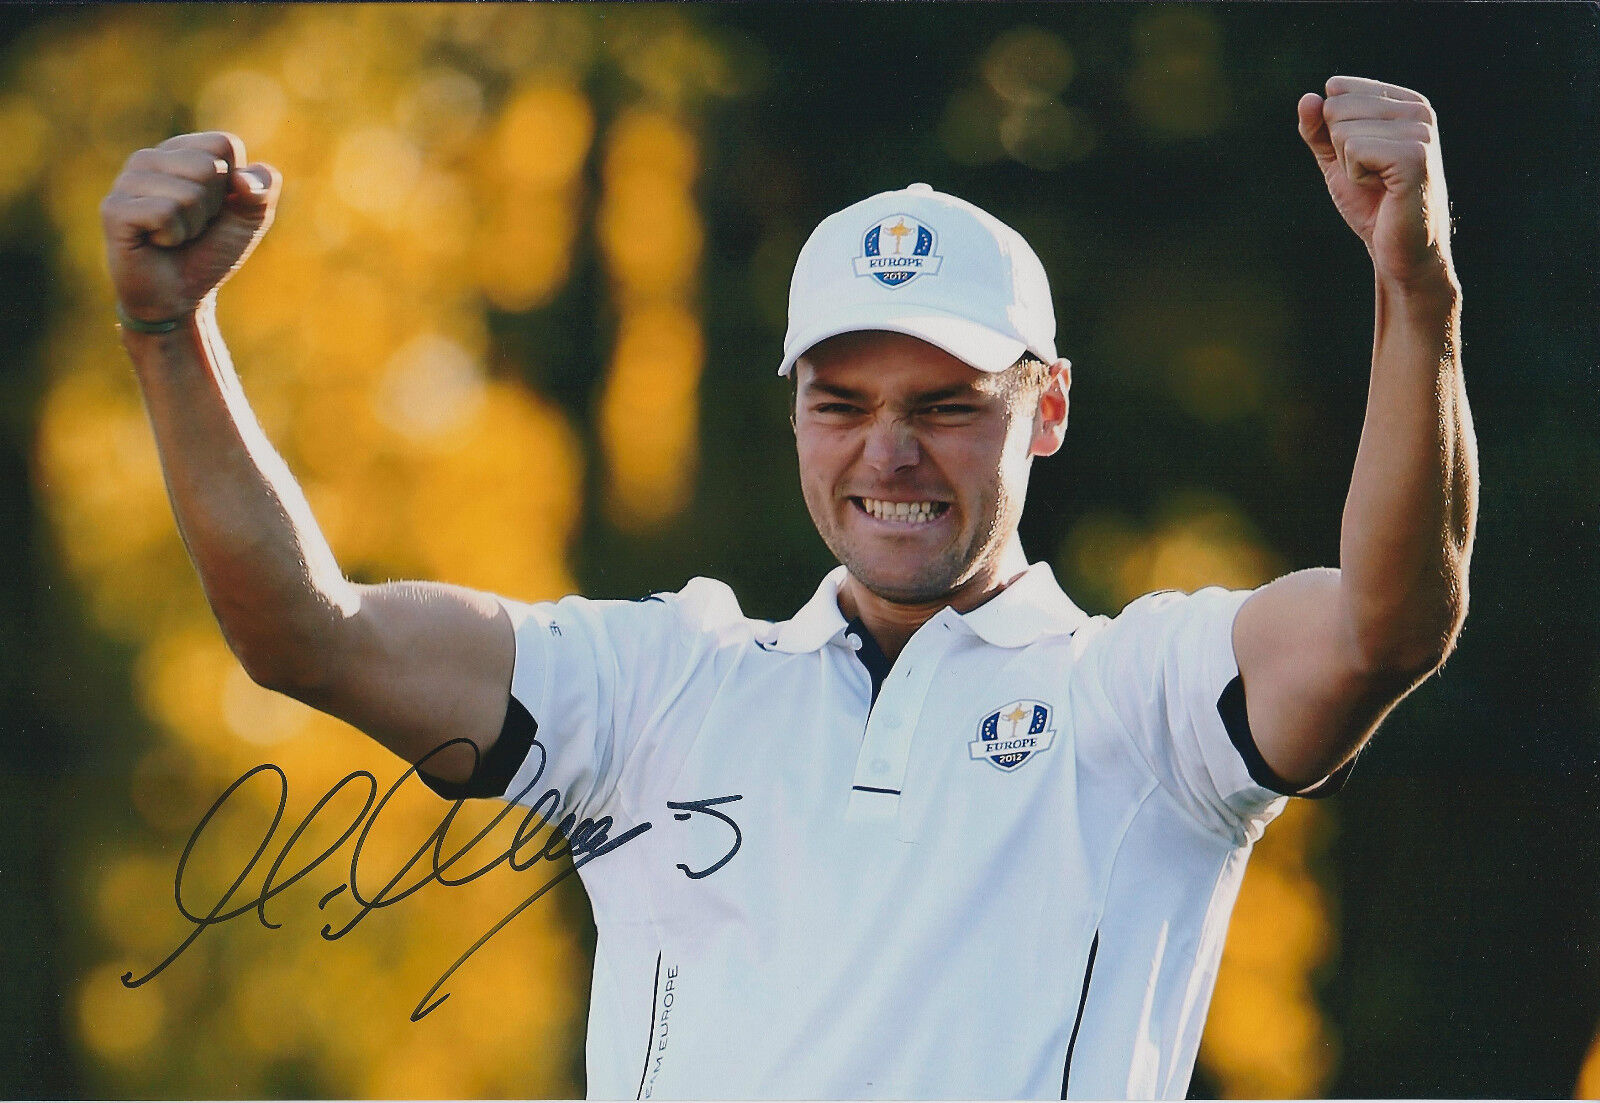 Martin KAYMER SIGNED Autograph 12x8 Photo Poster painting AFTAL COA 2012 Ryder Cup Win GOLF